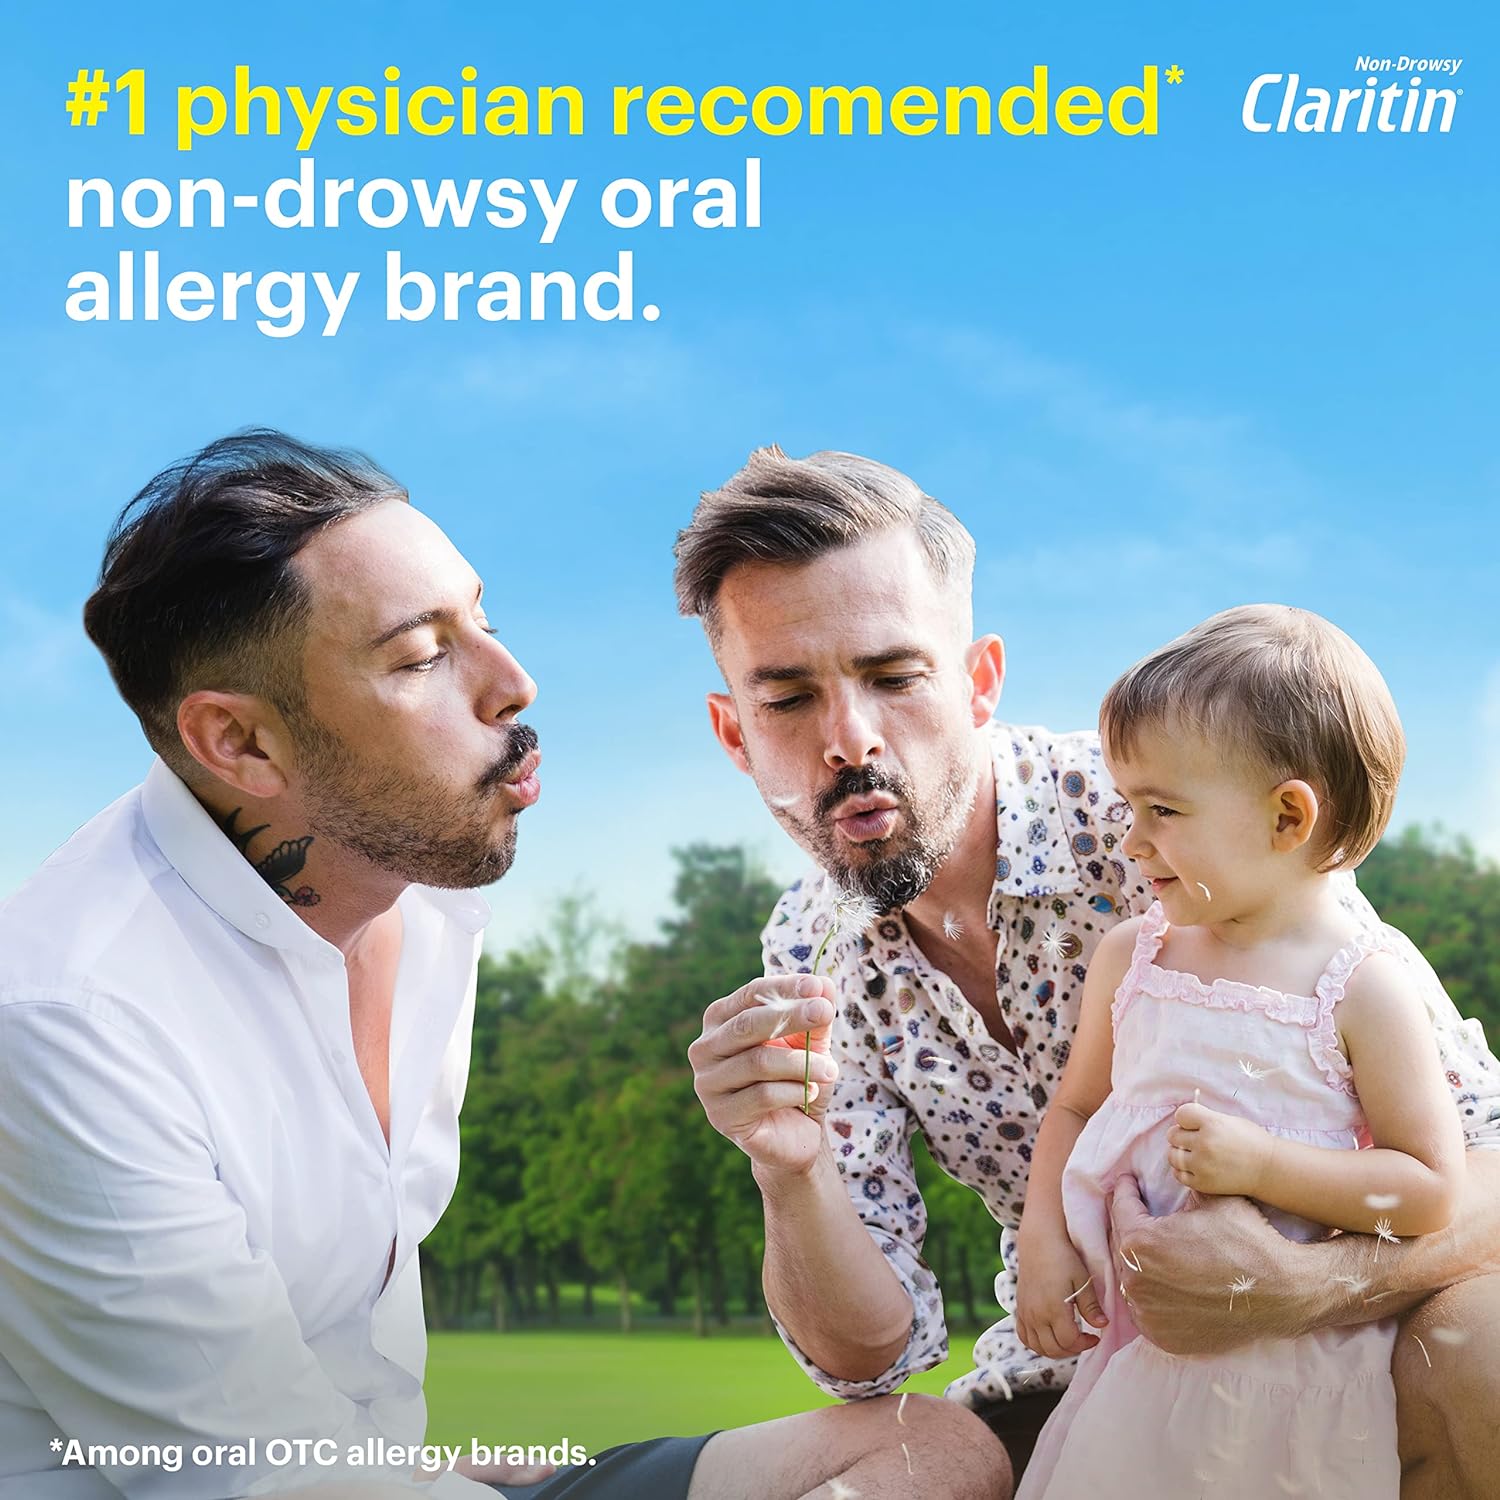 Claritin 24 Hour Non-Drowsy Allergy Medicine Bundle Pack, Prescription Strength Allergy Relief with 10mg Loratadine, Antihistamine, 45ct Tablets and 10ct Liquid Gels : Health & Household